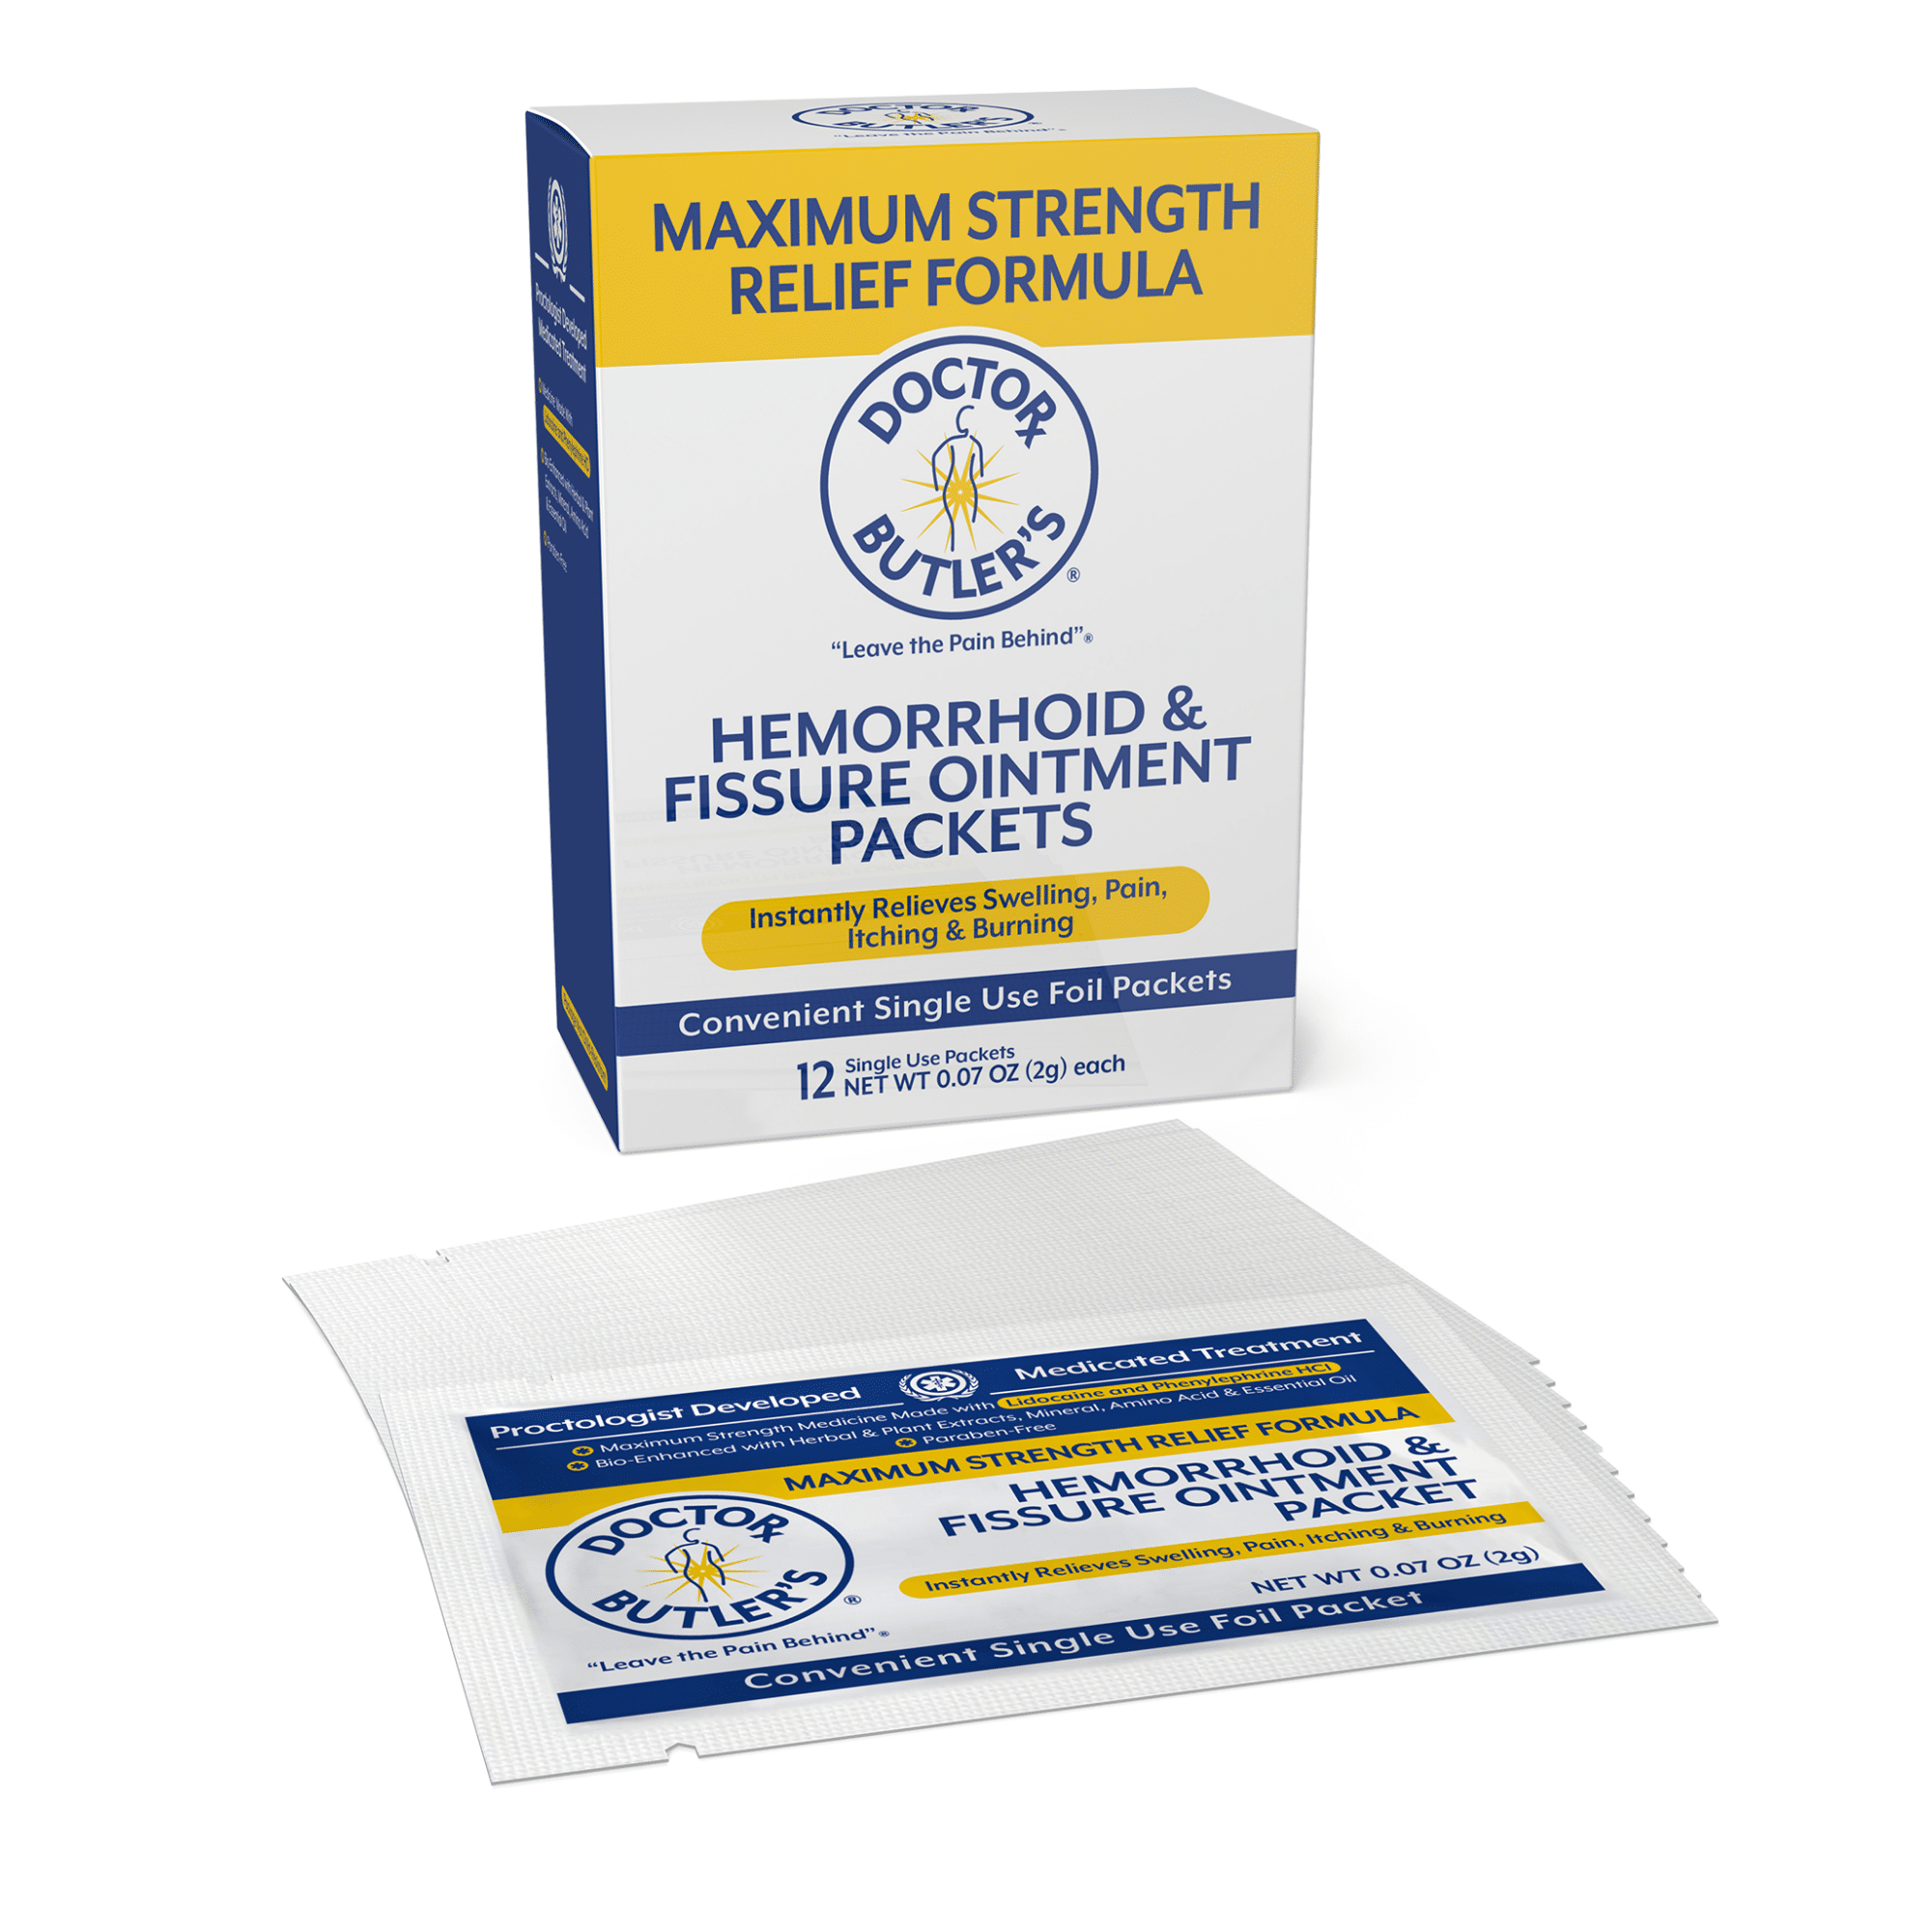 Doctor Butler's Hemorrhoid and Fissure Ointment To-Go Packets